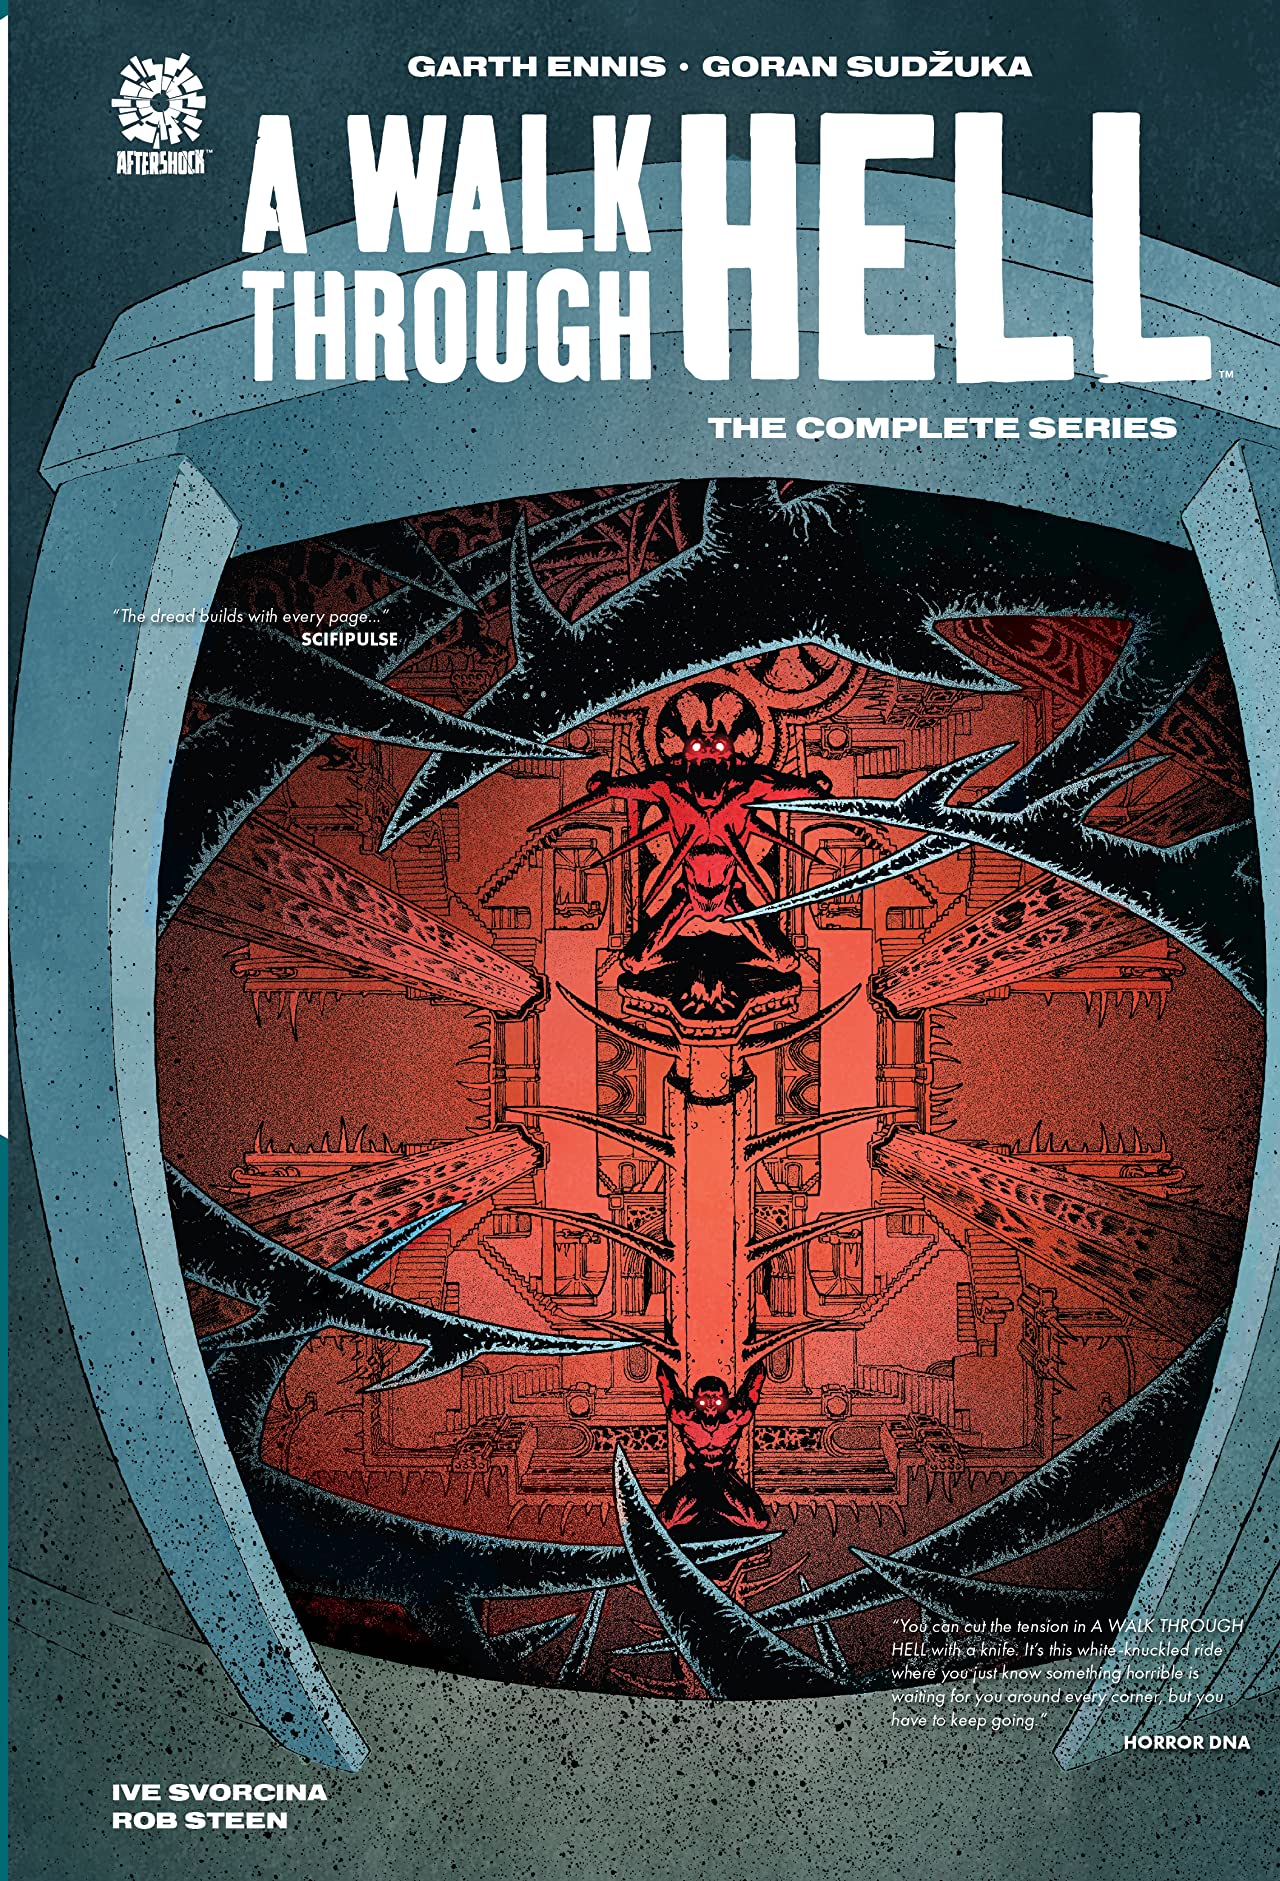 A Walk Through Hell: The Complete Series Hardcover